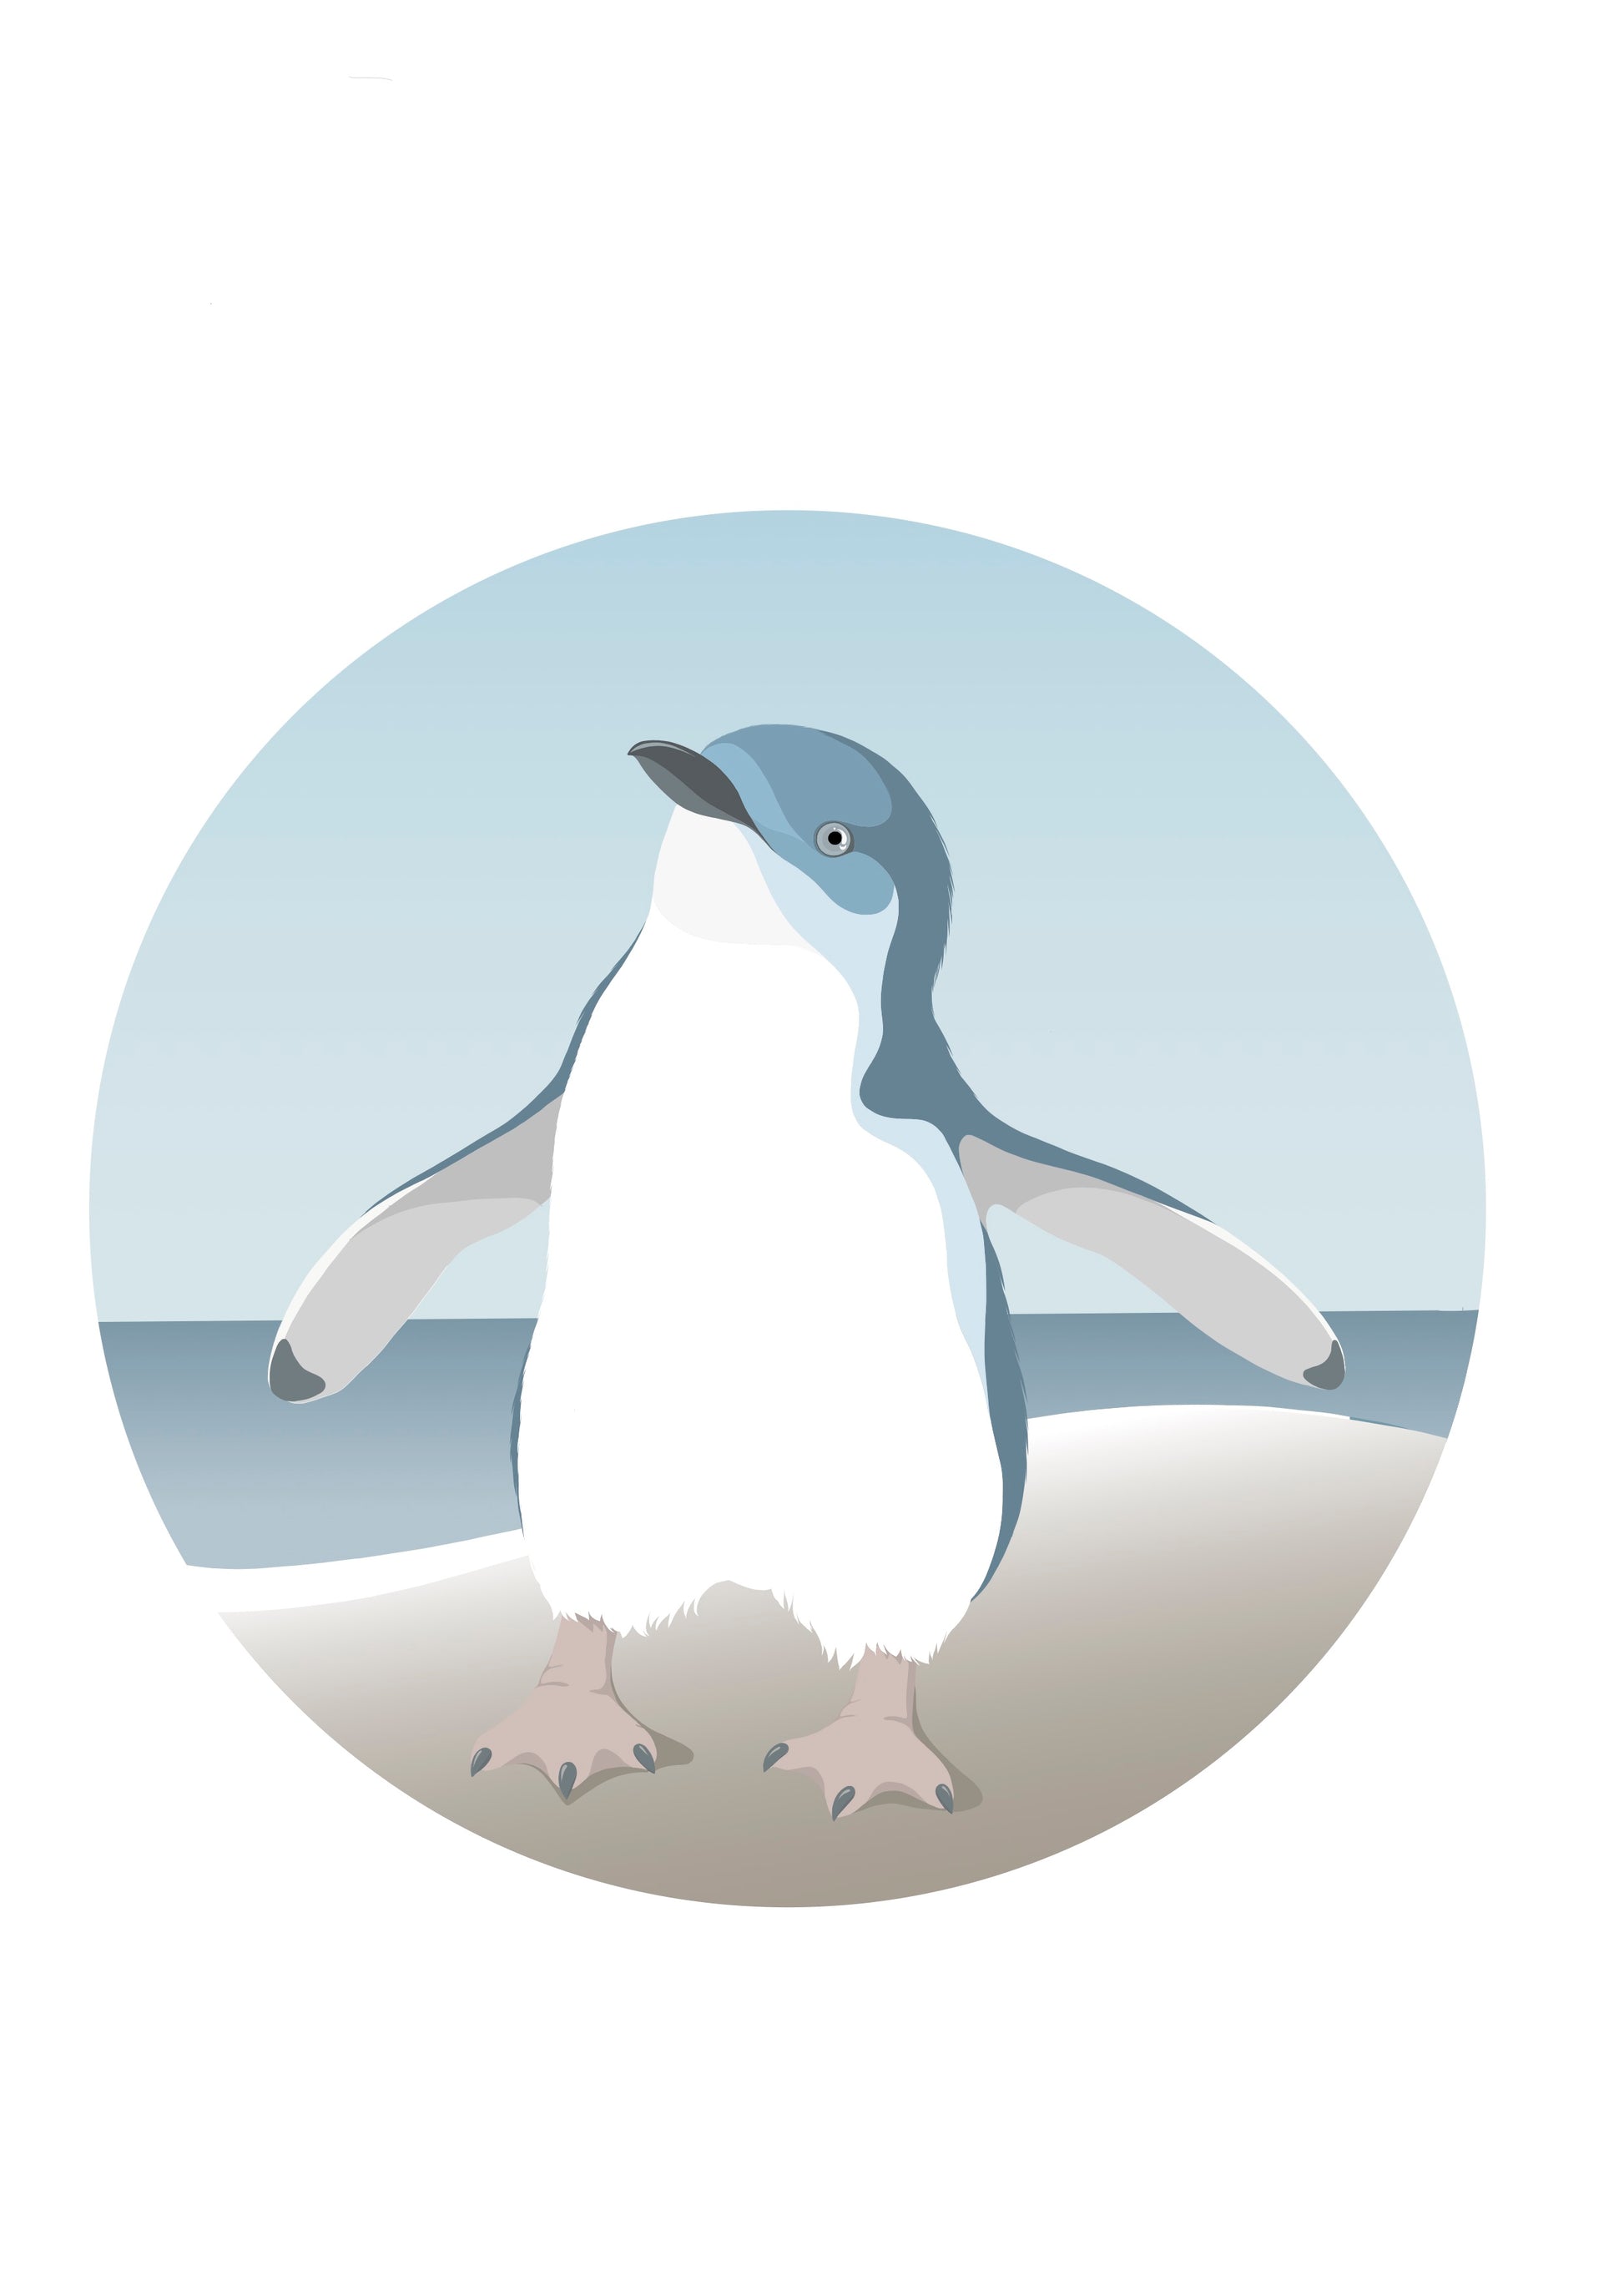 Art spot, wall decal of the Blue Penguin, Fairy Penguin, by Hansby Design  